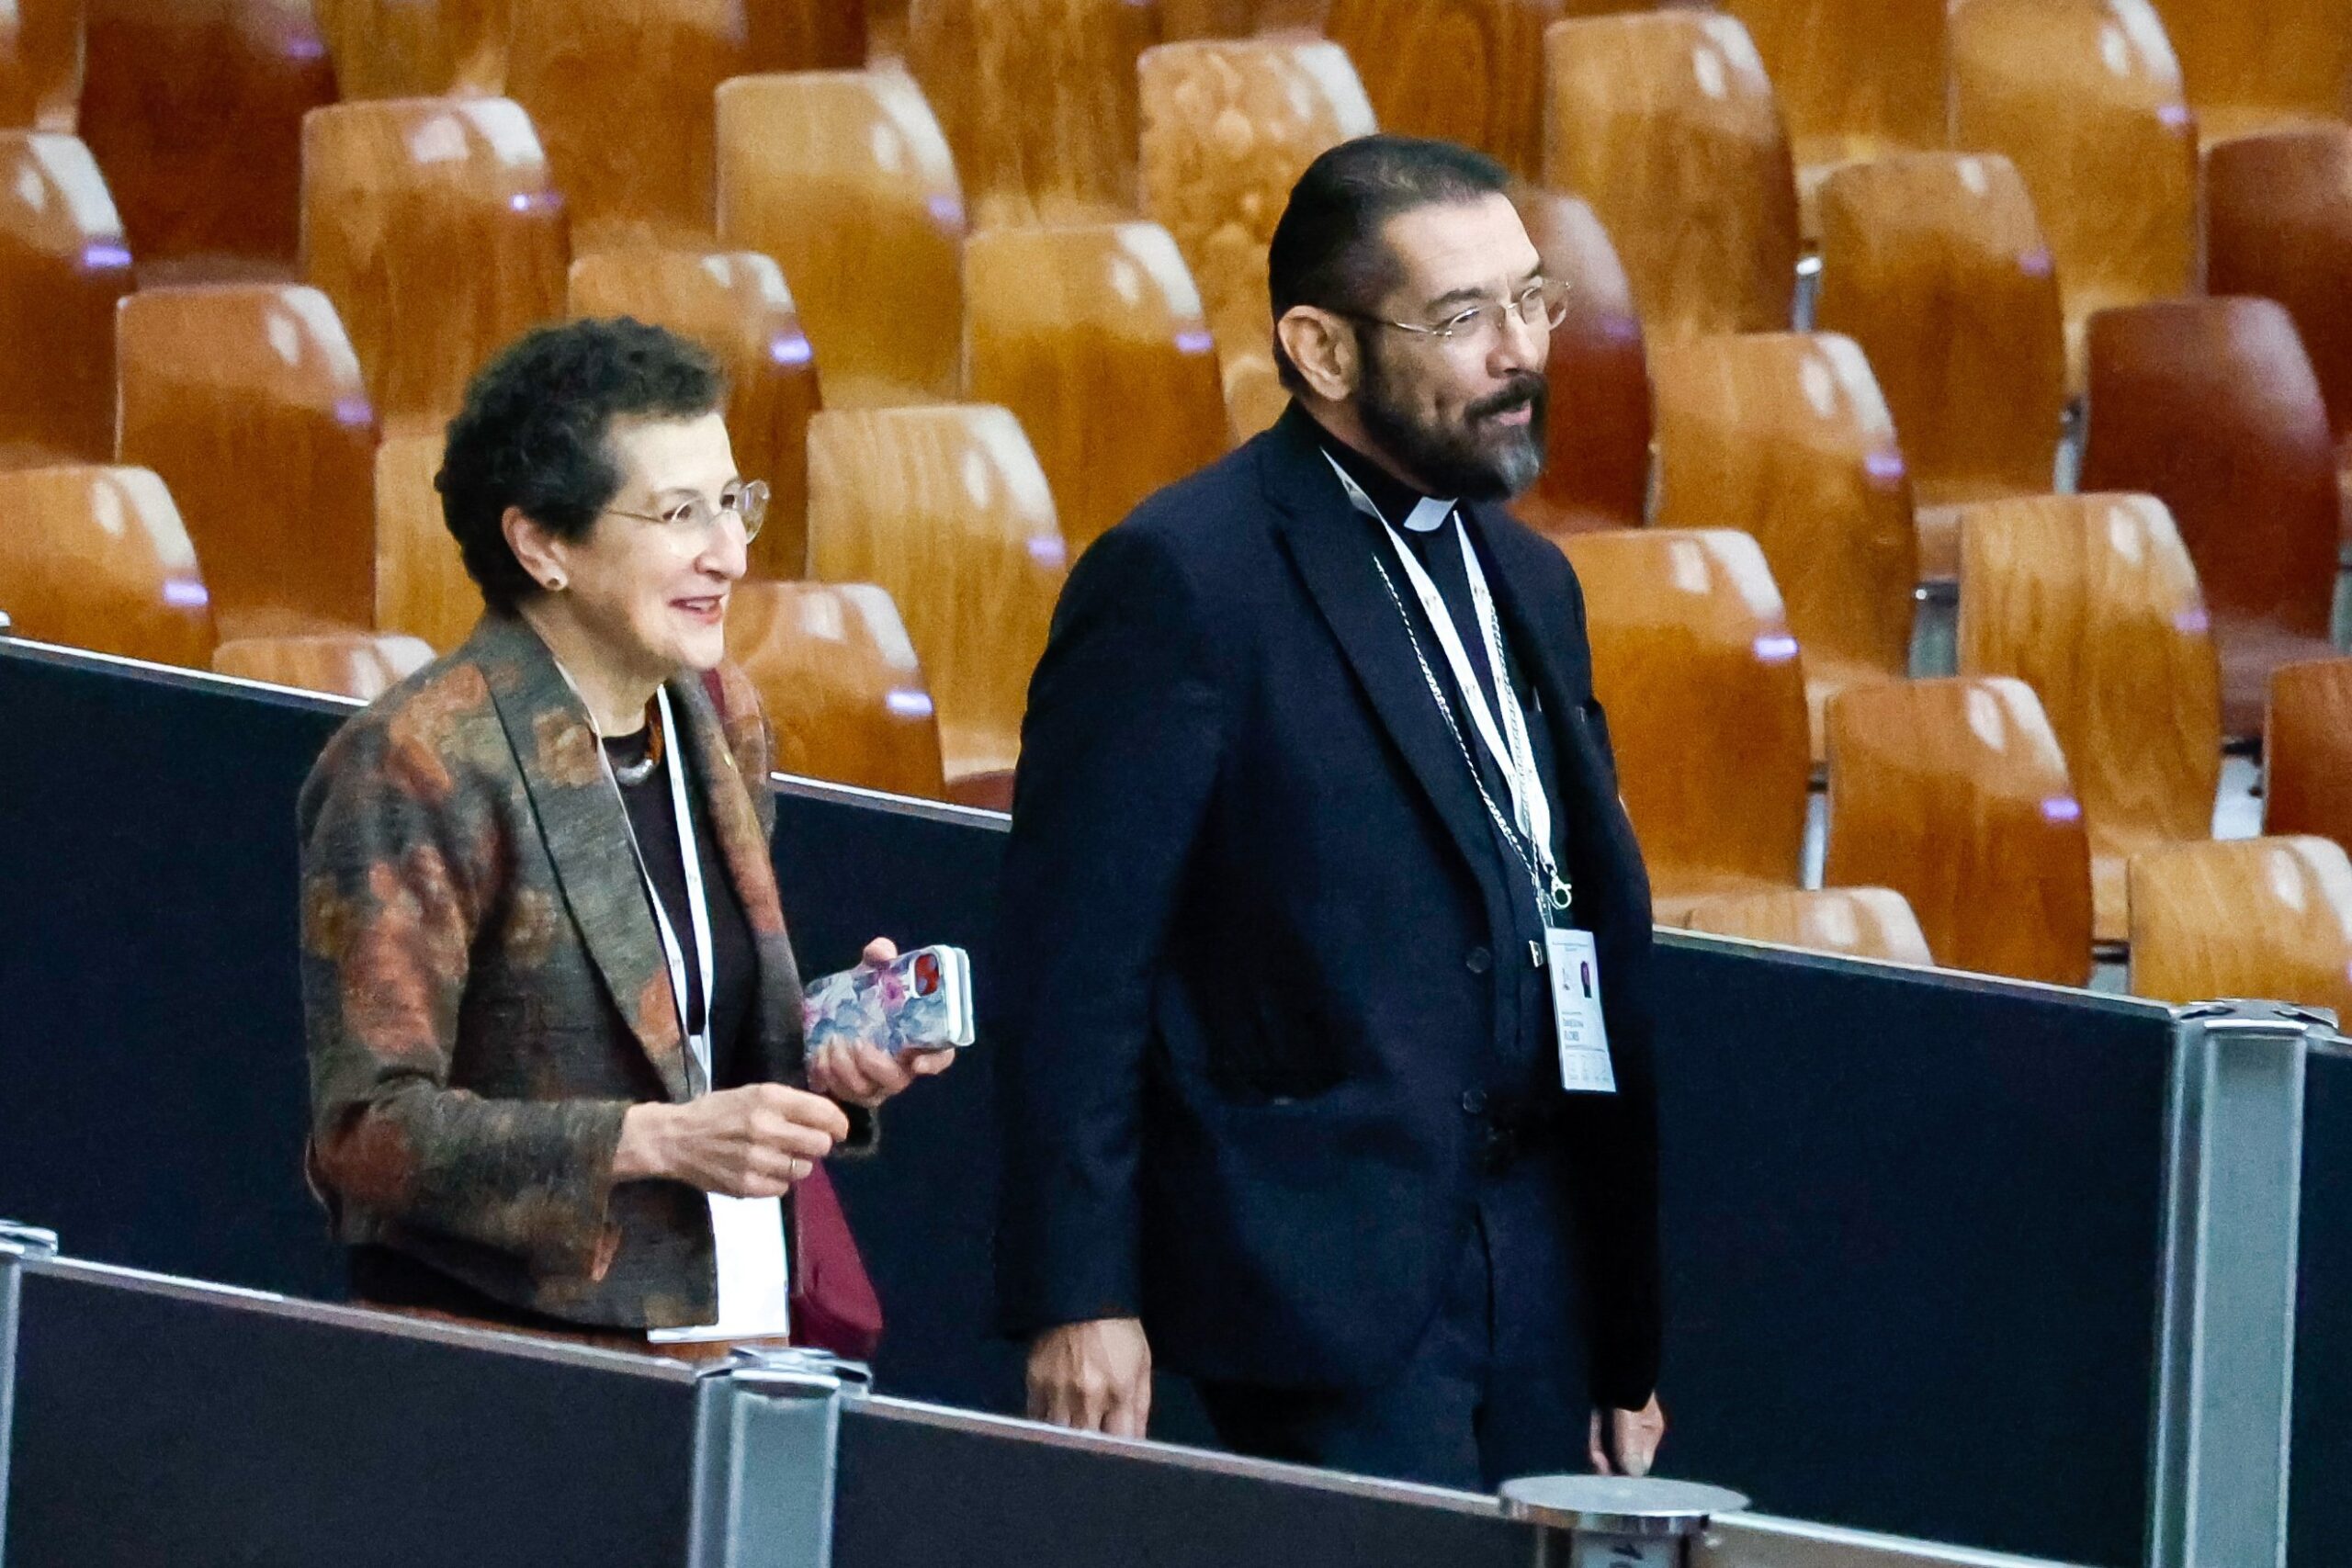 Susan Pascoe, a synod member from Australia, and Bishop Daniel E. Flores of Brownsville, Texas, arrive for a session of the assembly of the Synod of Bishops in the Vatican's Paul VI Audience Hall Oct. 17, 2023. (CNS photo/Lola Gomez)